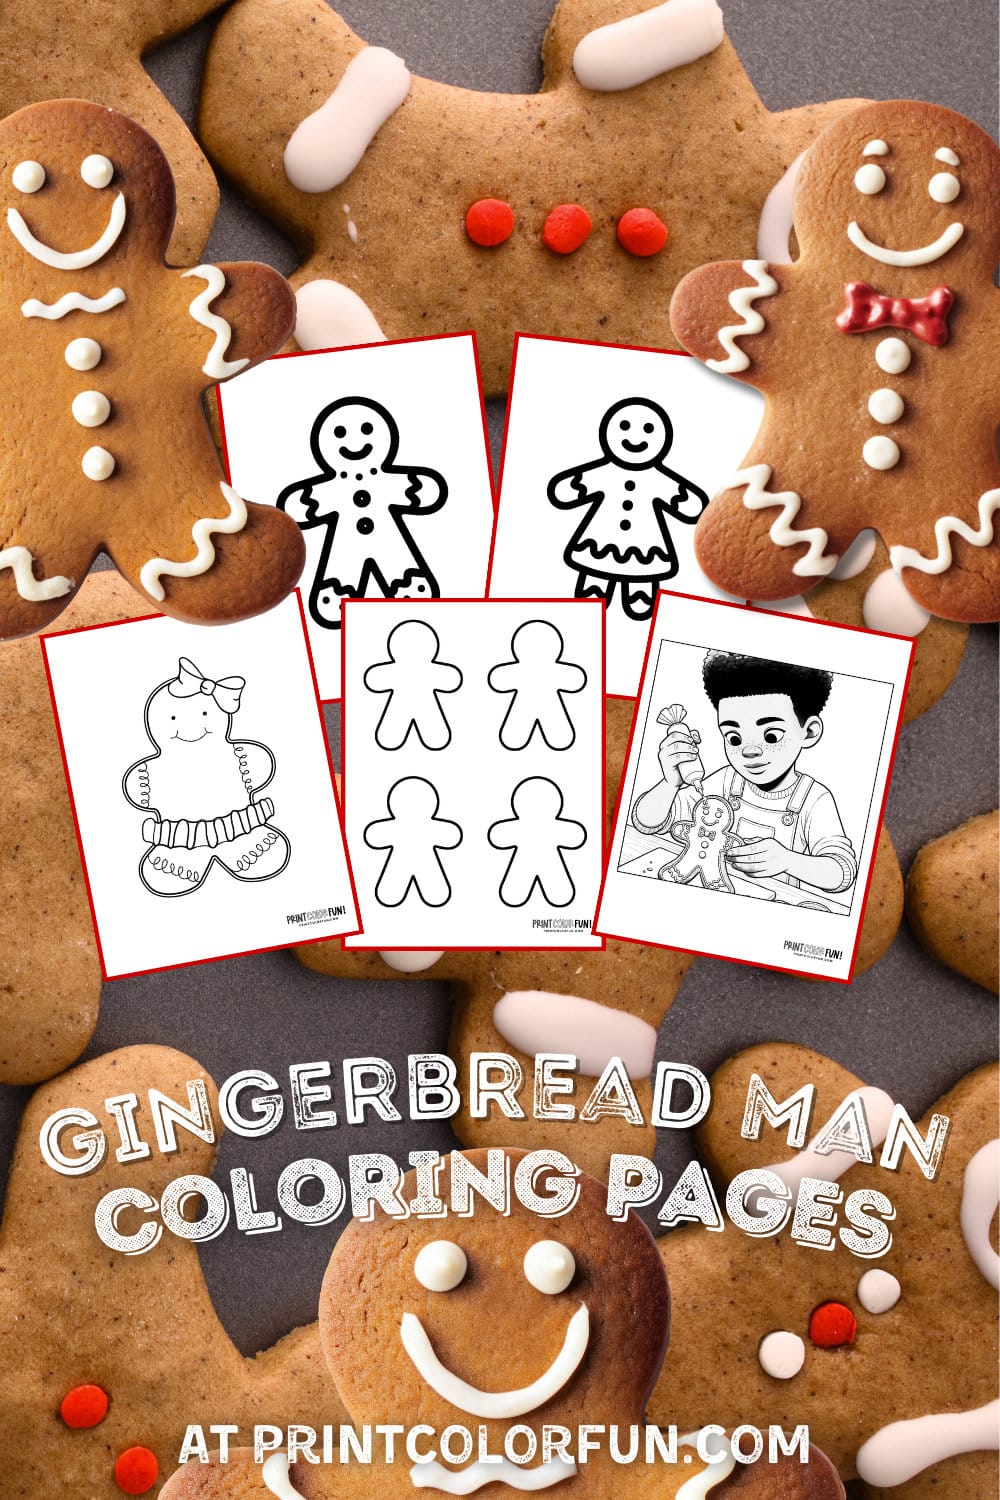 Gingerbread man coloring pages and activities at PrintColorFun com